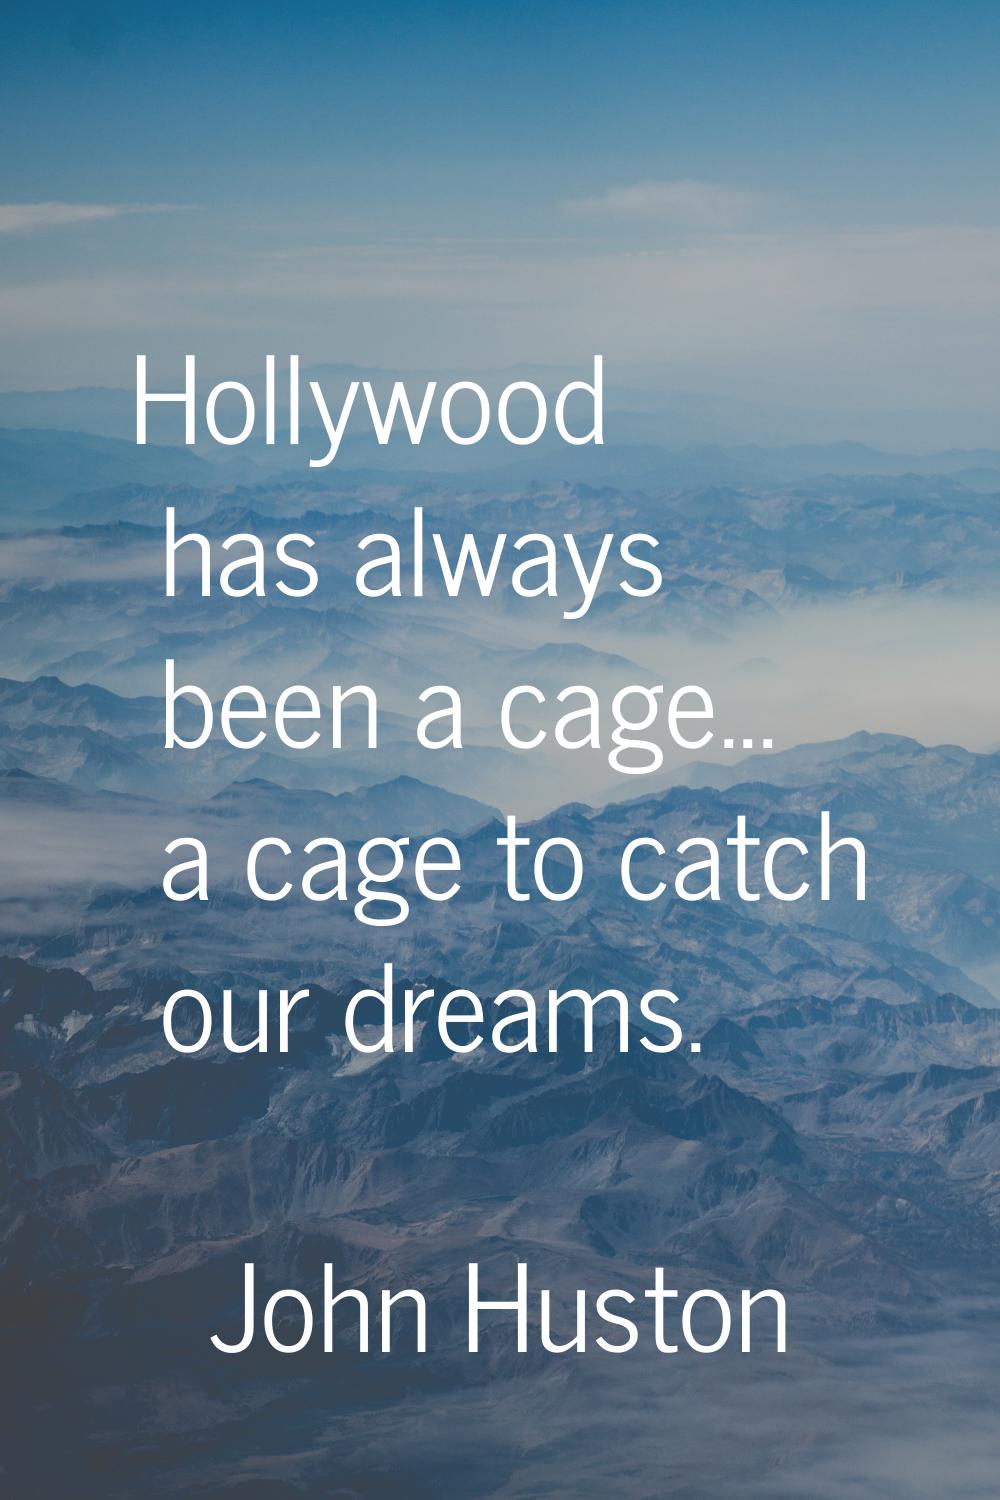 Hollywood has always been a cage... a cage to catch our dreams.